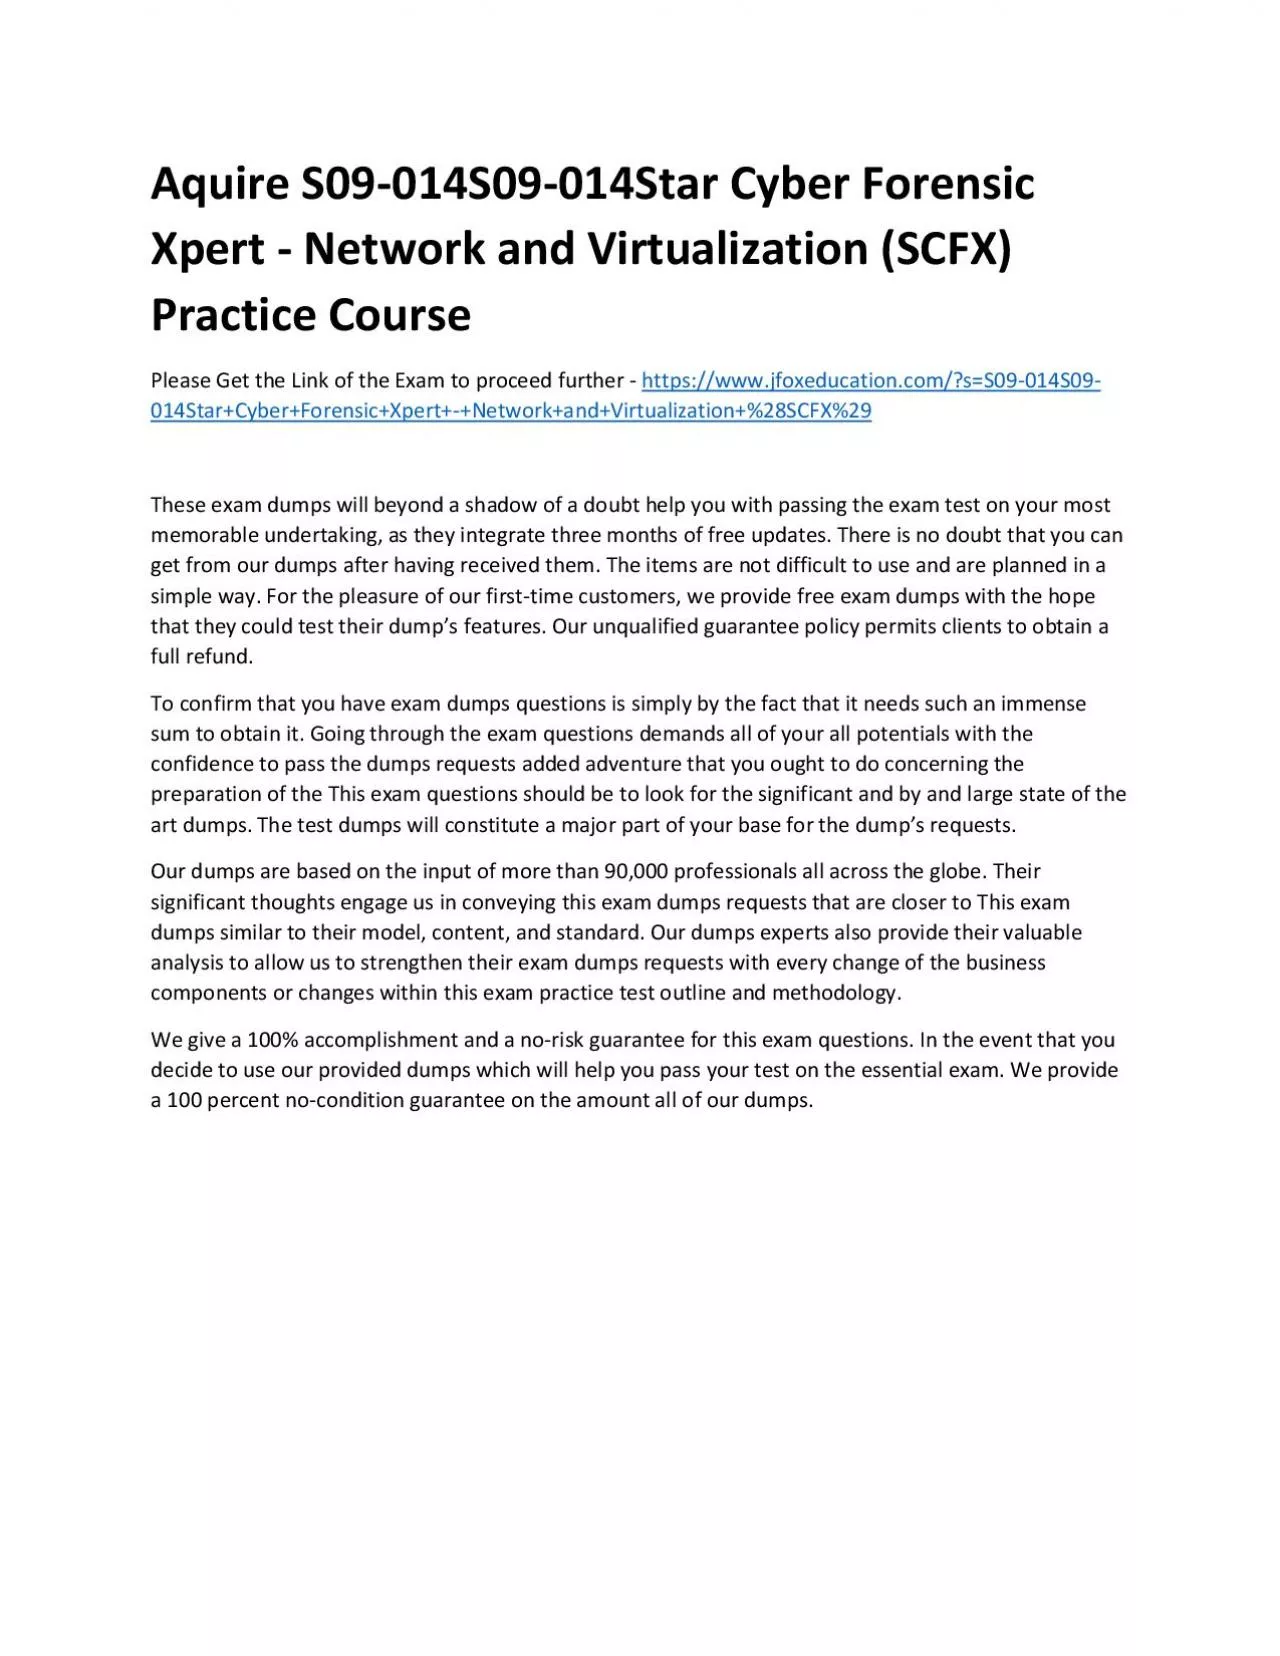 Aquire S09-014S09-014Star Cyber Forensic Xpert - Network and Virtualization (SCFX) Practice